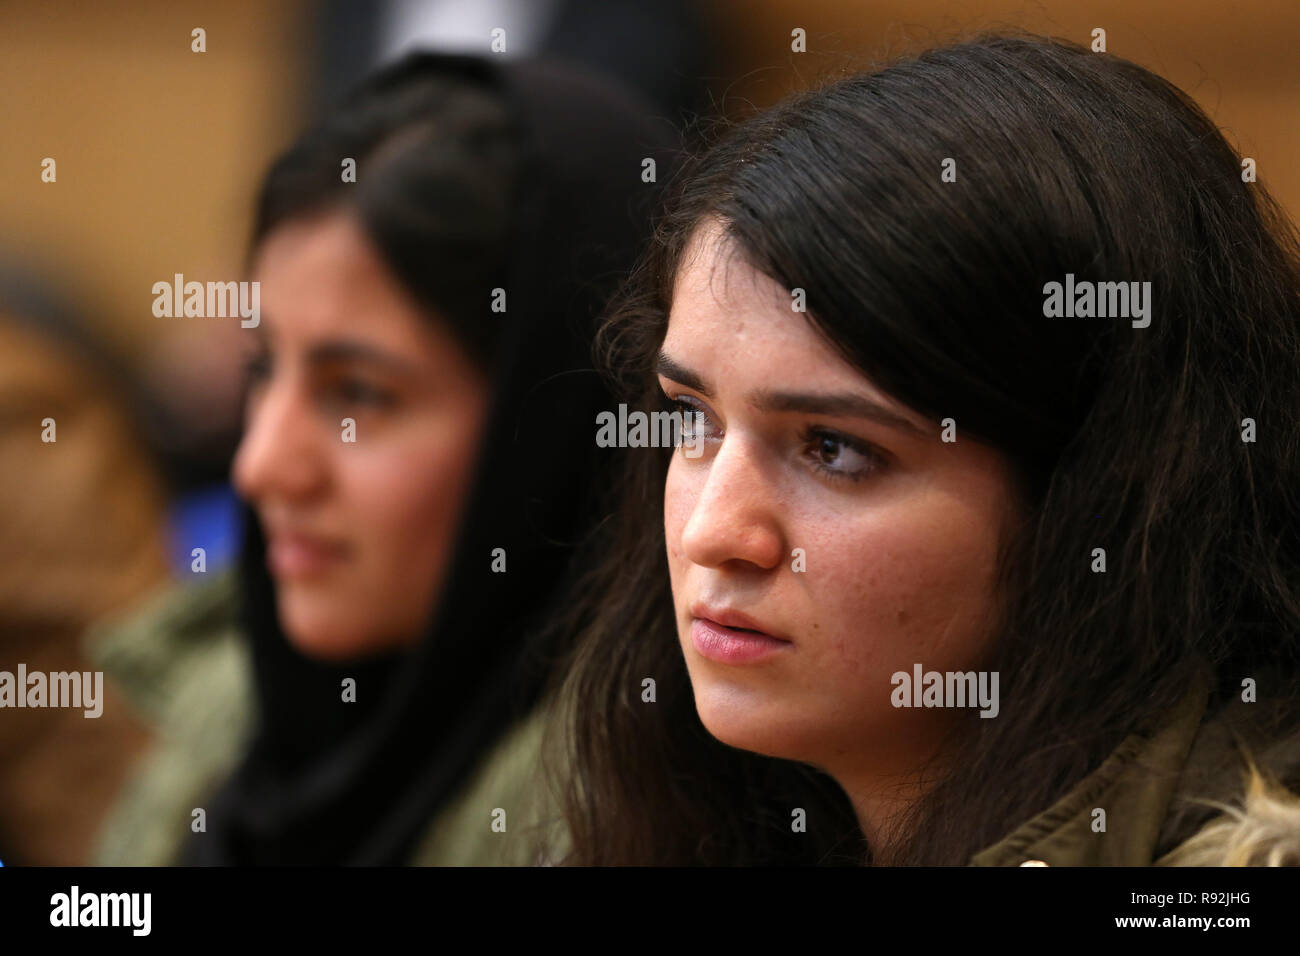 (181219) -- ATHENS, Dec. 19, 2018 (Xinhua) -- Migrant students are seen attending the press conference of Greek Minister for Migration Policy Dimitrios Vitsas on the occasion of the International Migrants Day in Athens, Greece, on Dec. 18, 2018. Greek society has sent a clear message of solidarity to people seeking a better life away from their homelands, Greek officials told the press conference on Tuesday on the occasion of International Migrants Day, observed on Dec. 18 each year since 2000. During the eight years of the debt crisis, Greece has been working systematically towards the smooth Stock Photo